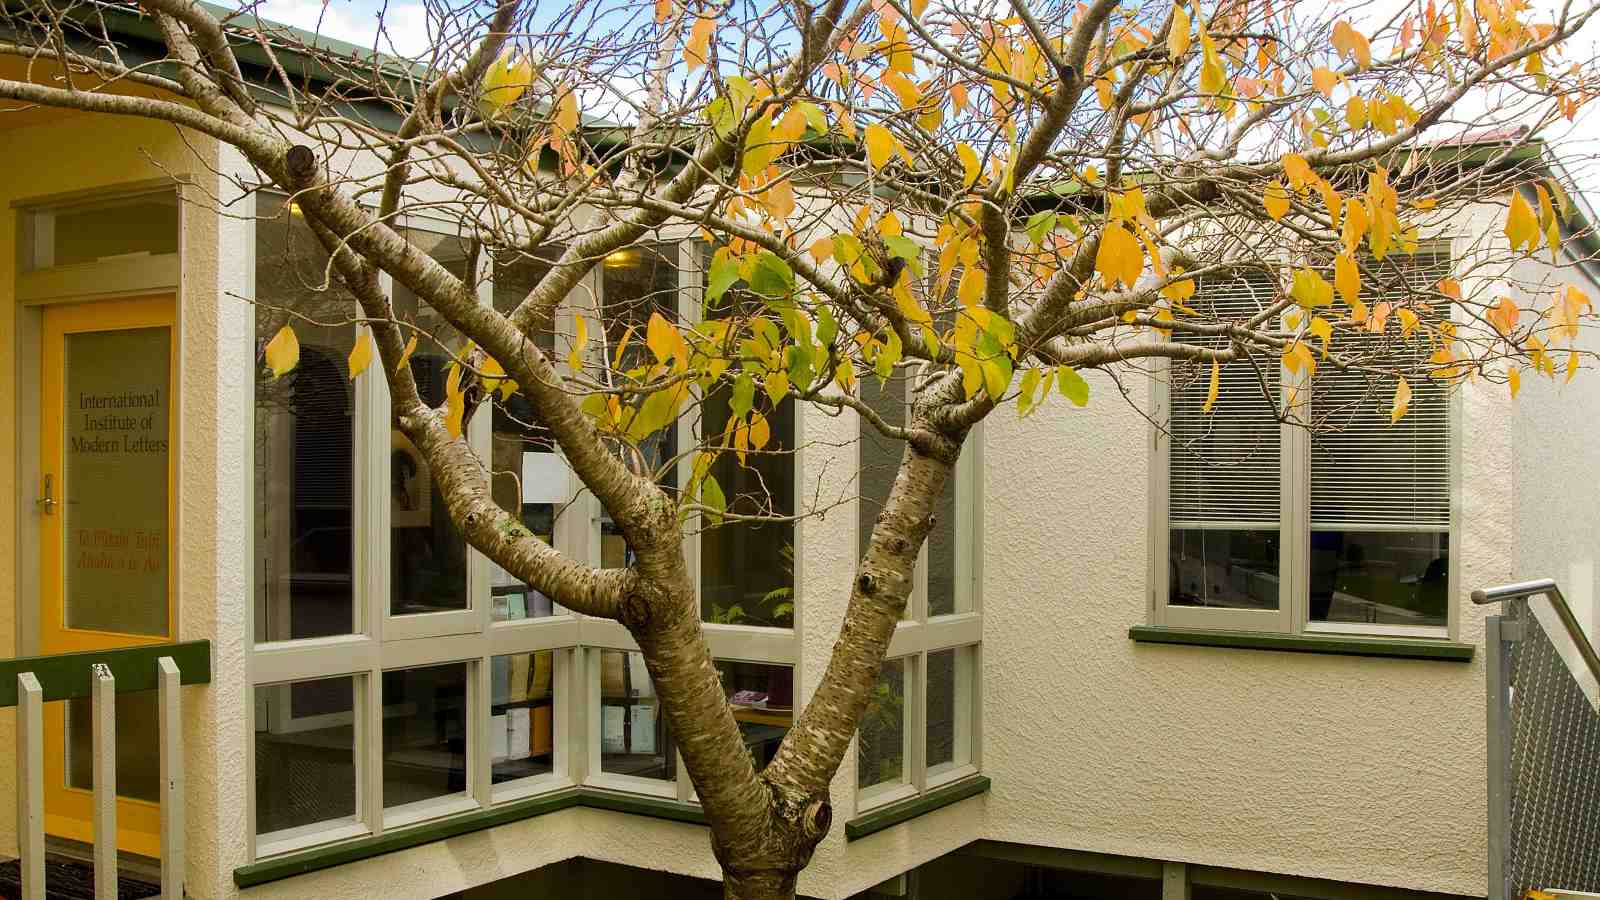 Autumn tree with yellow leaves outside IIML building